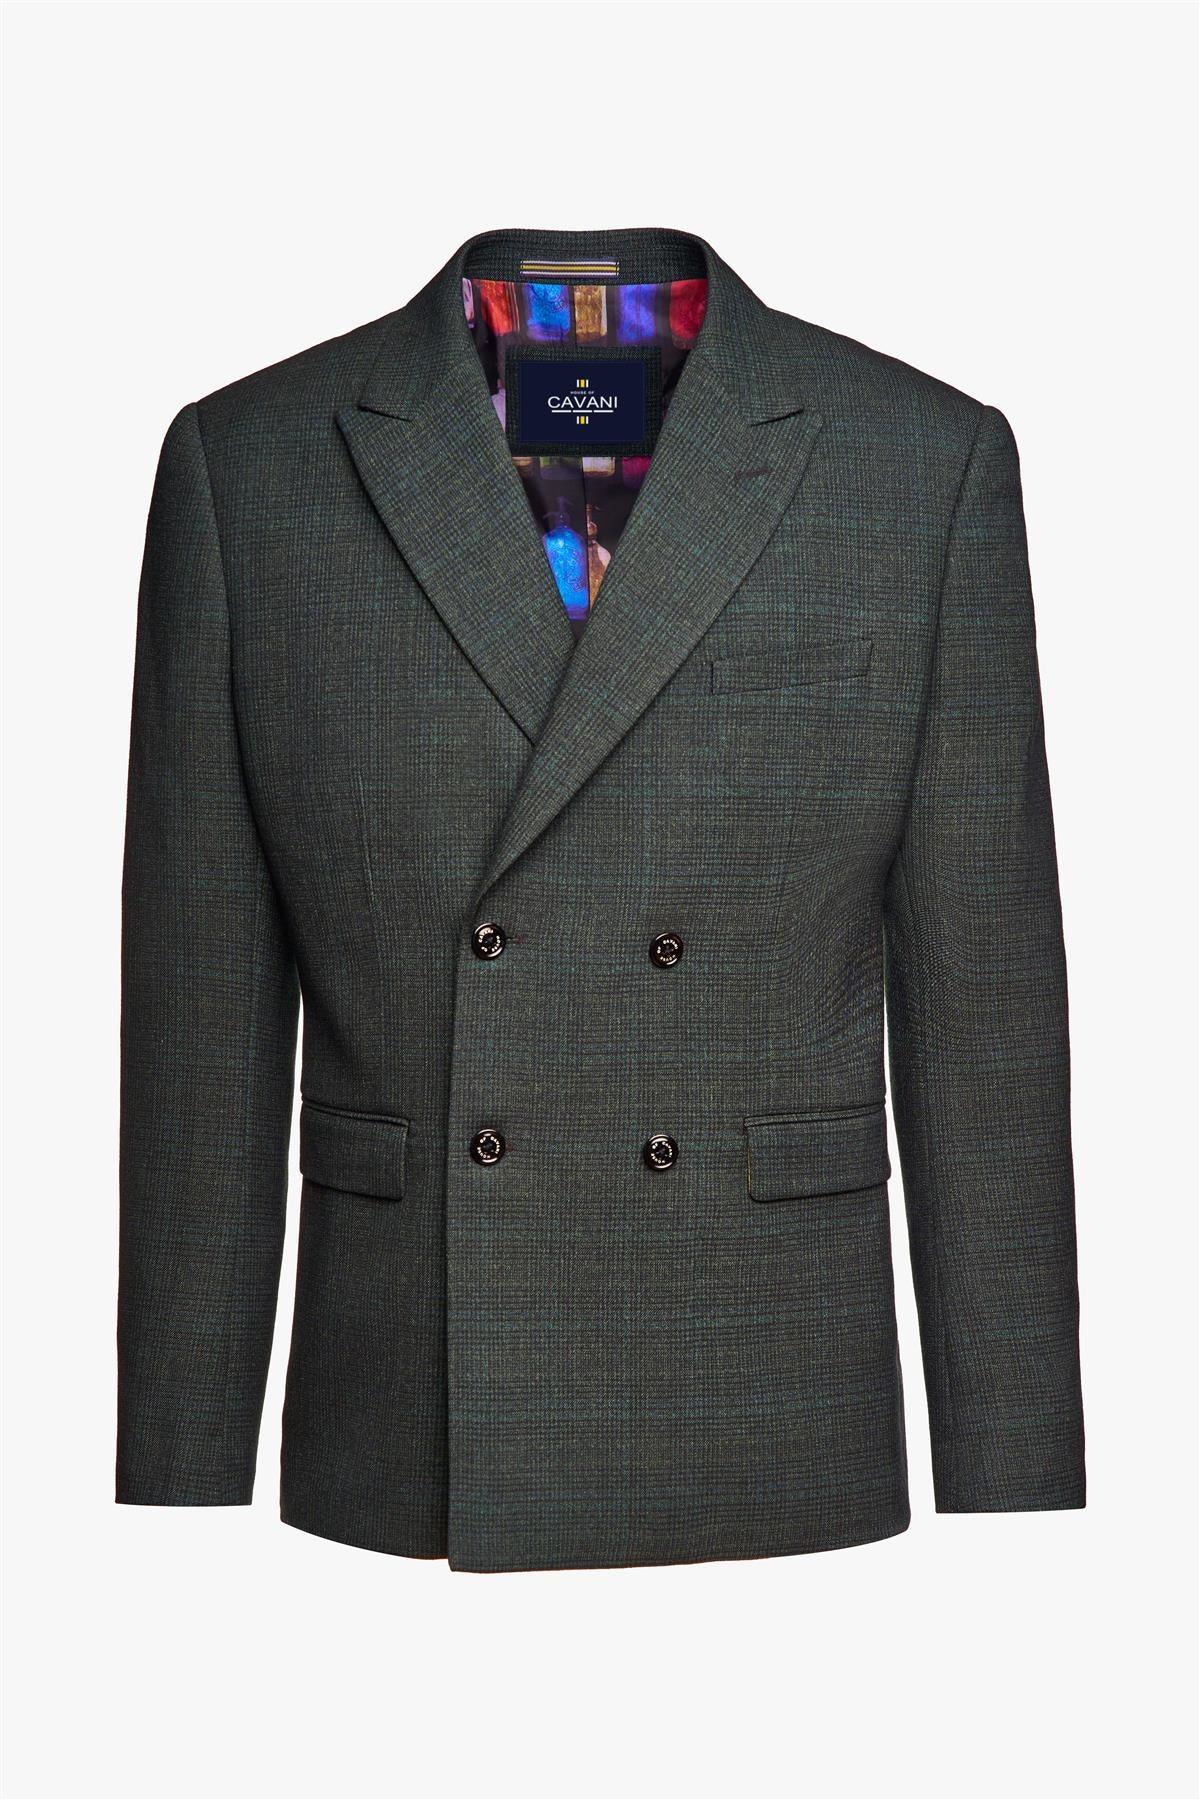 Caridi Olive Double Breasted Blazer Front Product Shot